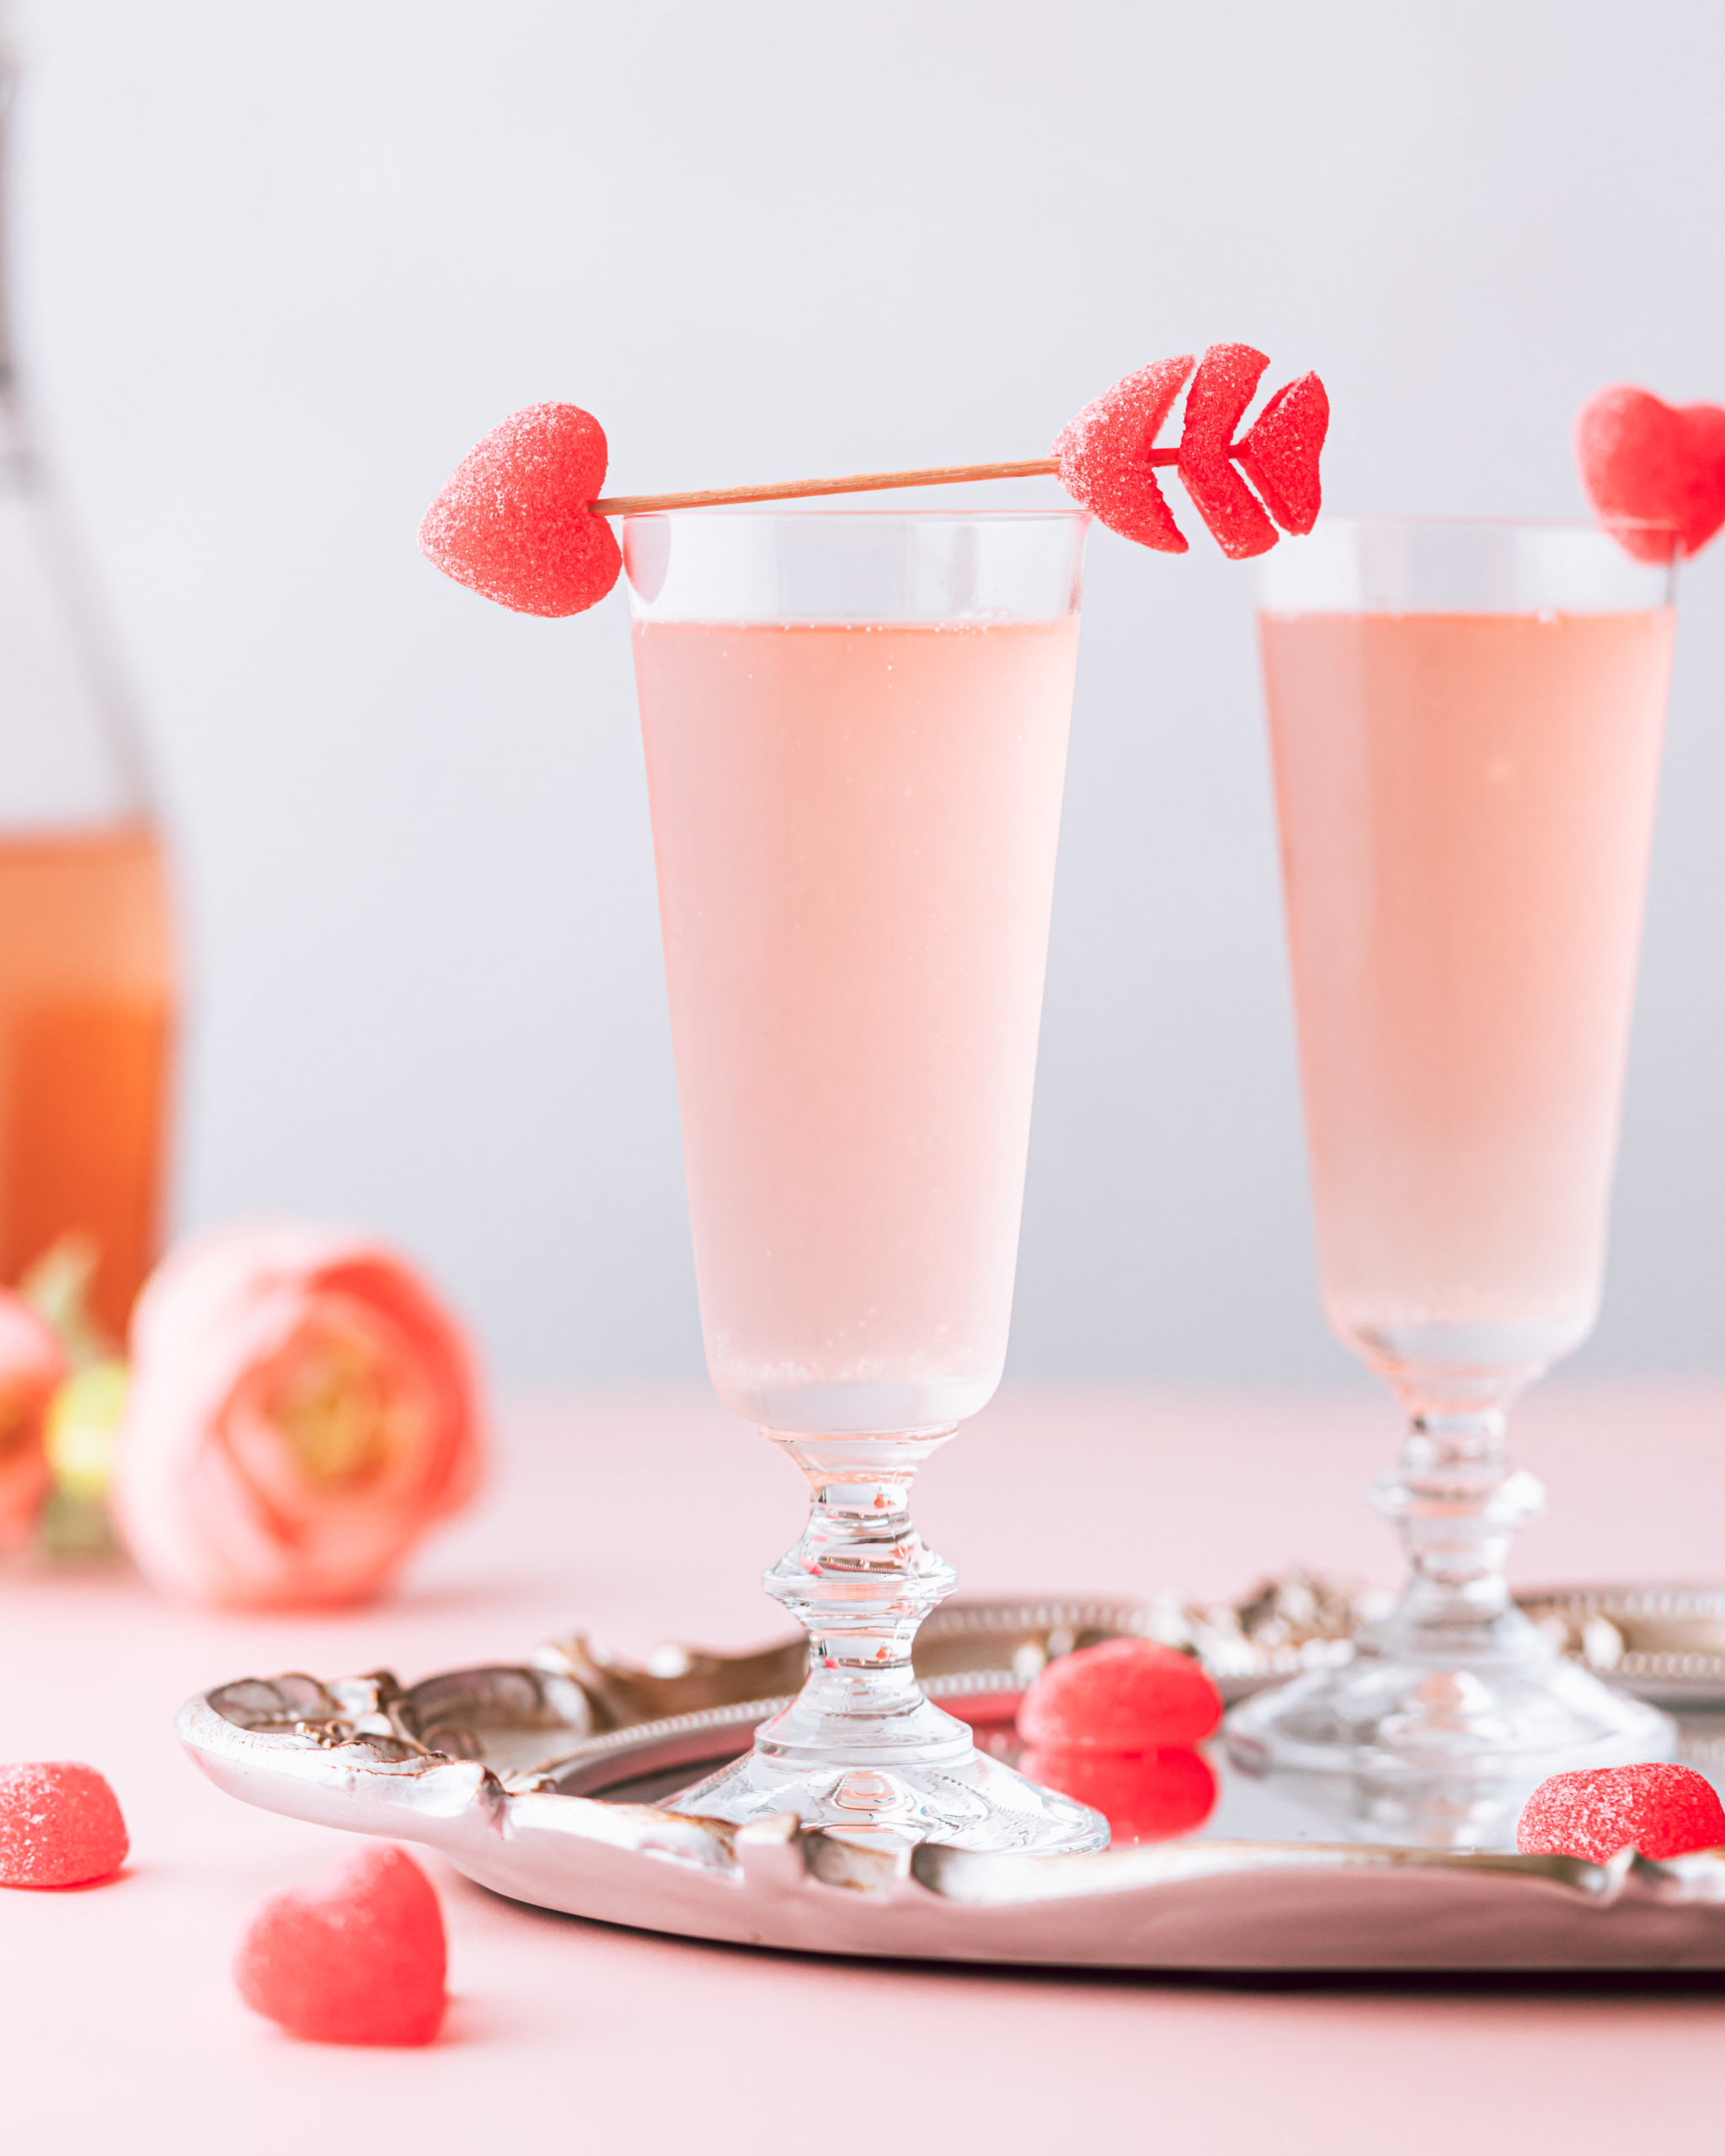 This new rose Champagne was made to be served on ice and sipped on